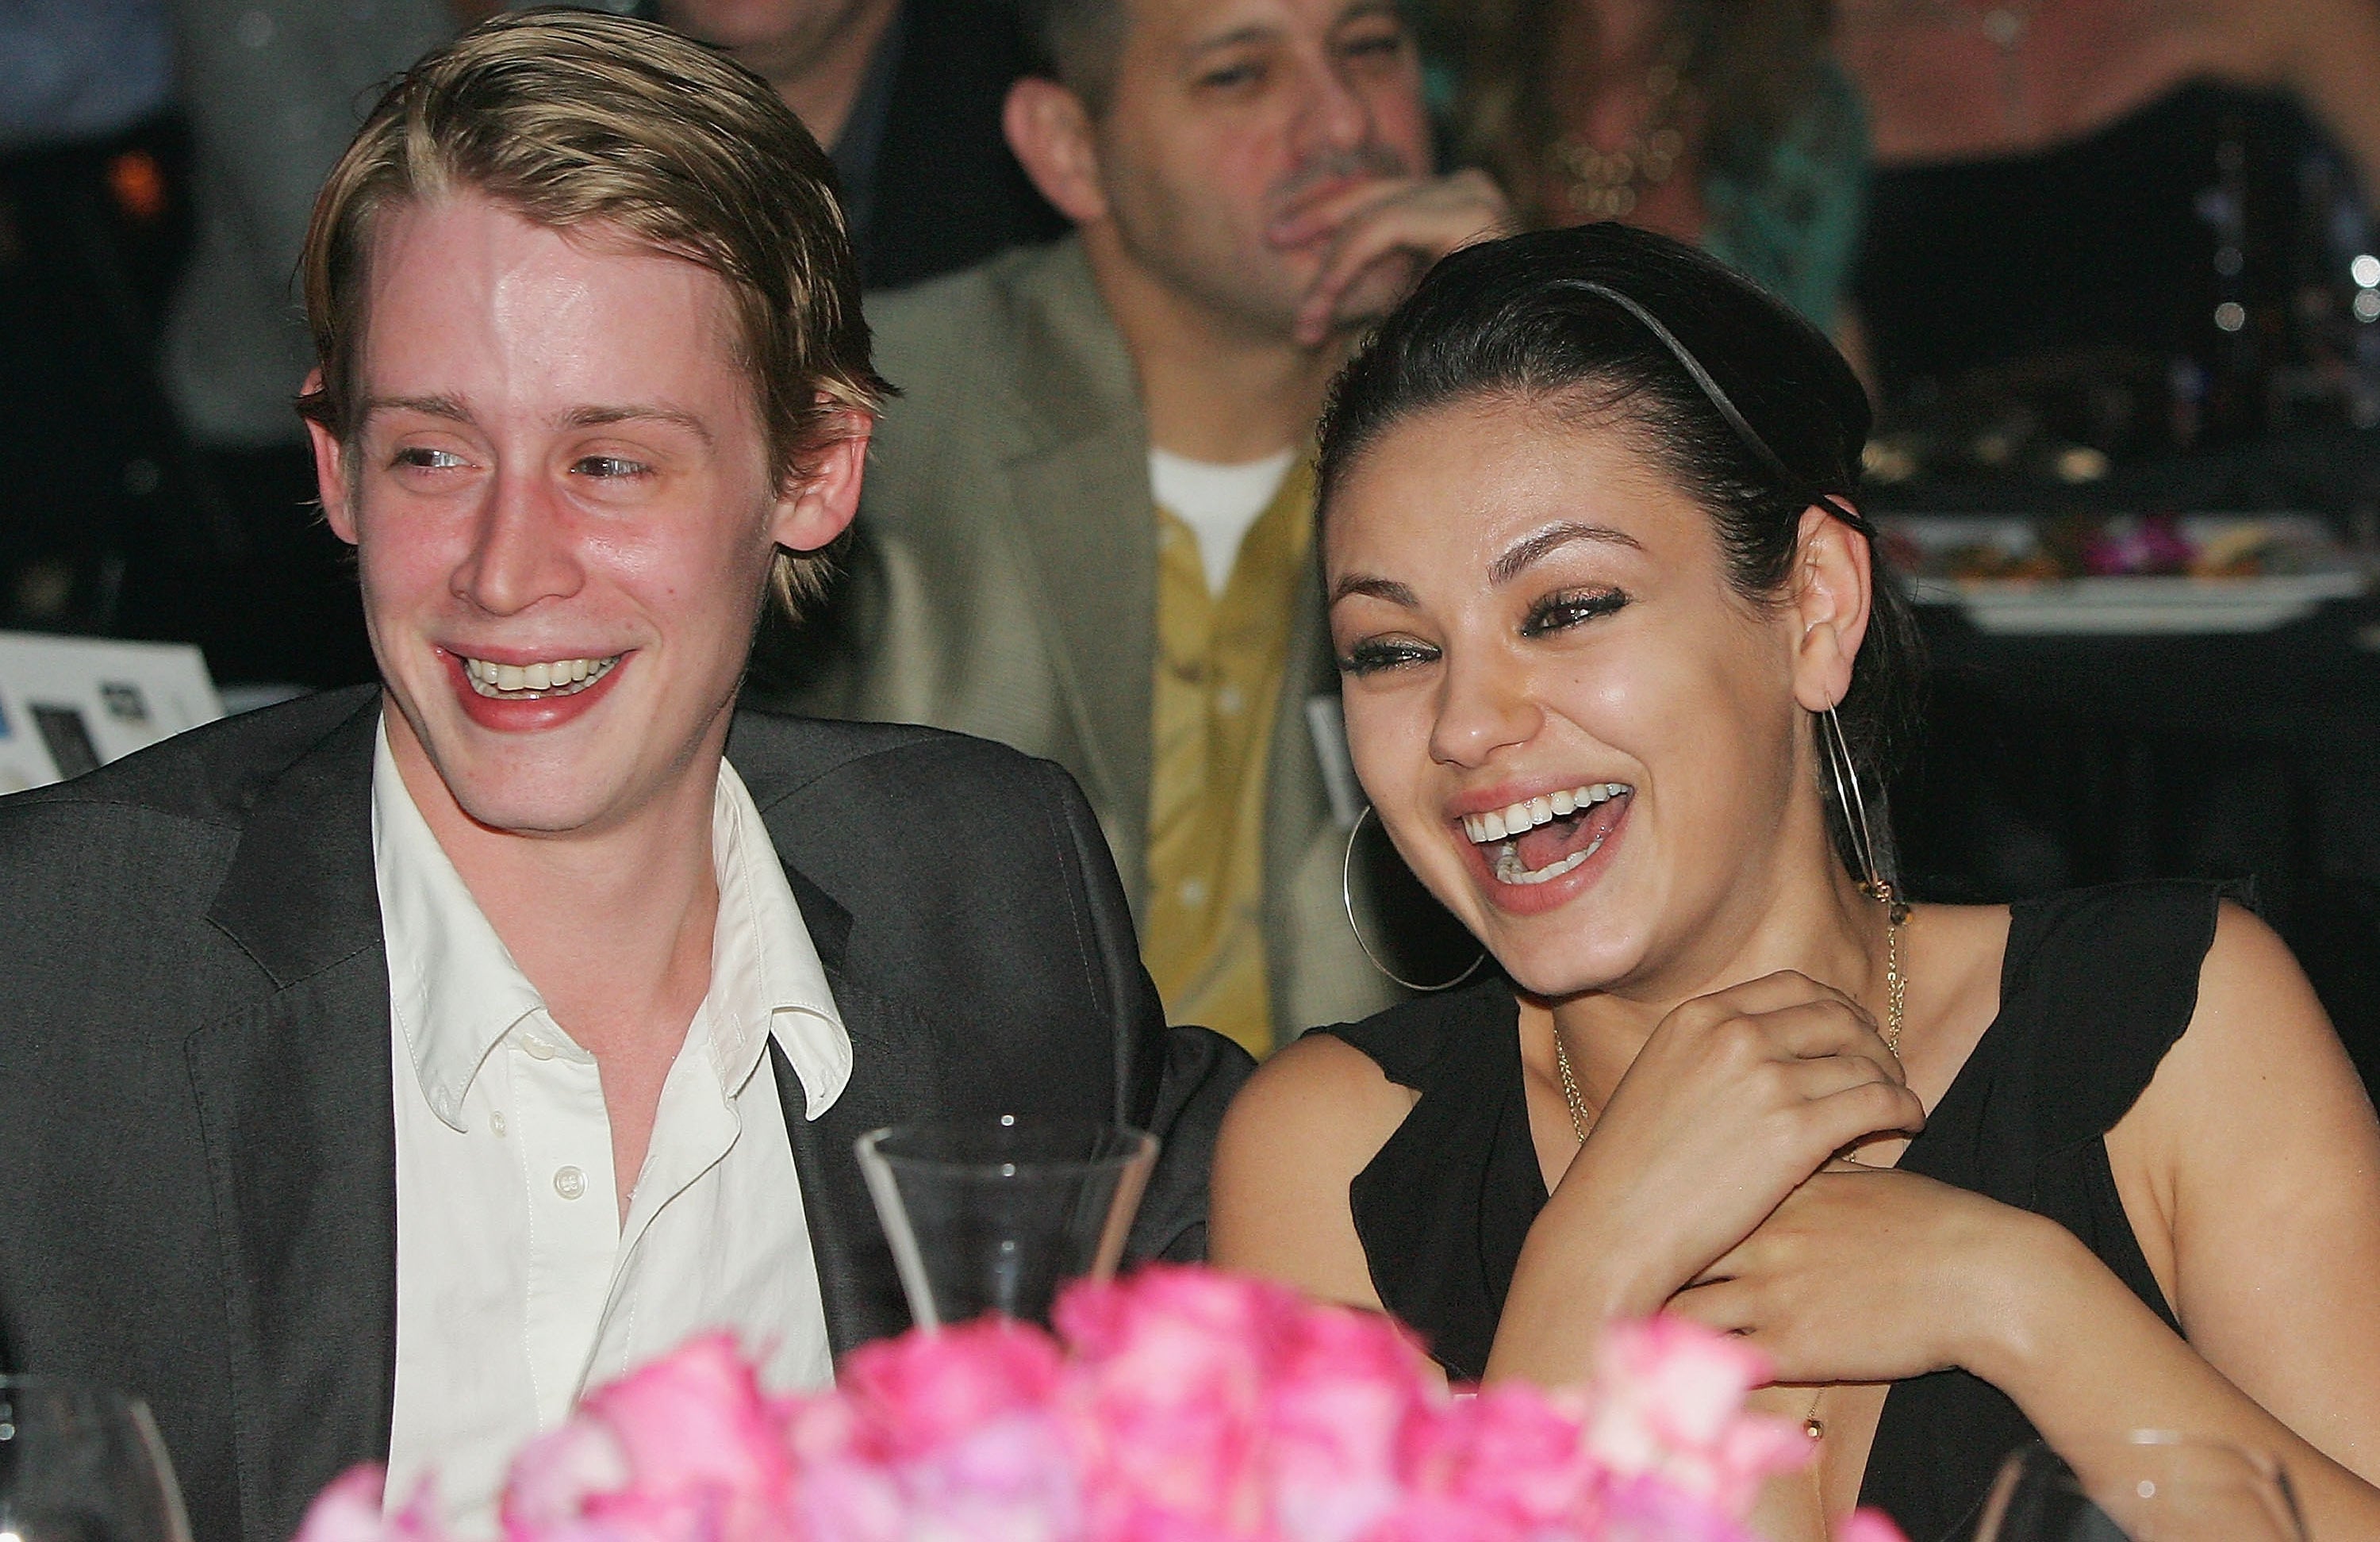 Macaulay Culkin and Mila Kunis smiling at the launch of the &quot;uBid for Hurricane Relief&quot; charity auction and benefit at the Empire Ballroom